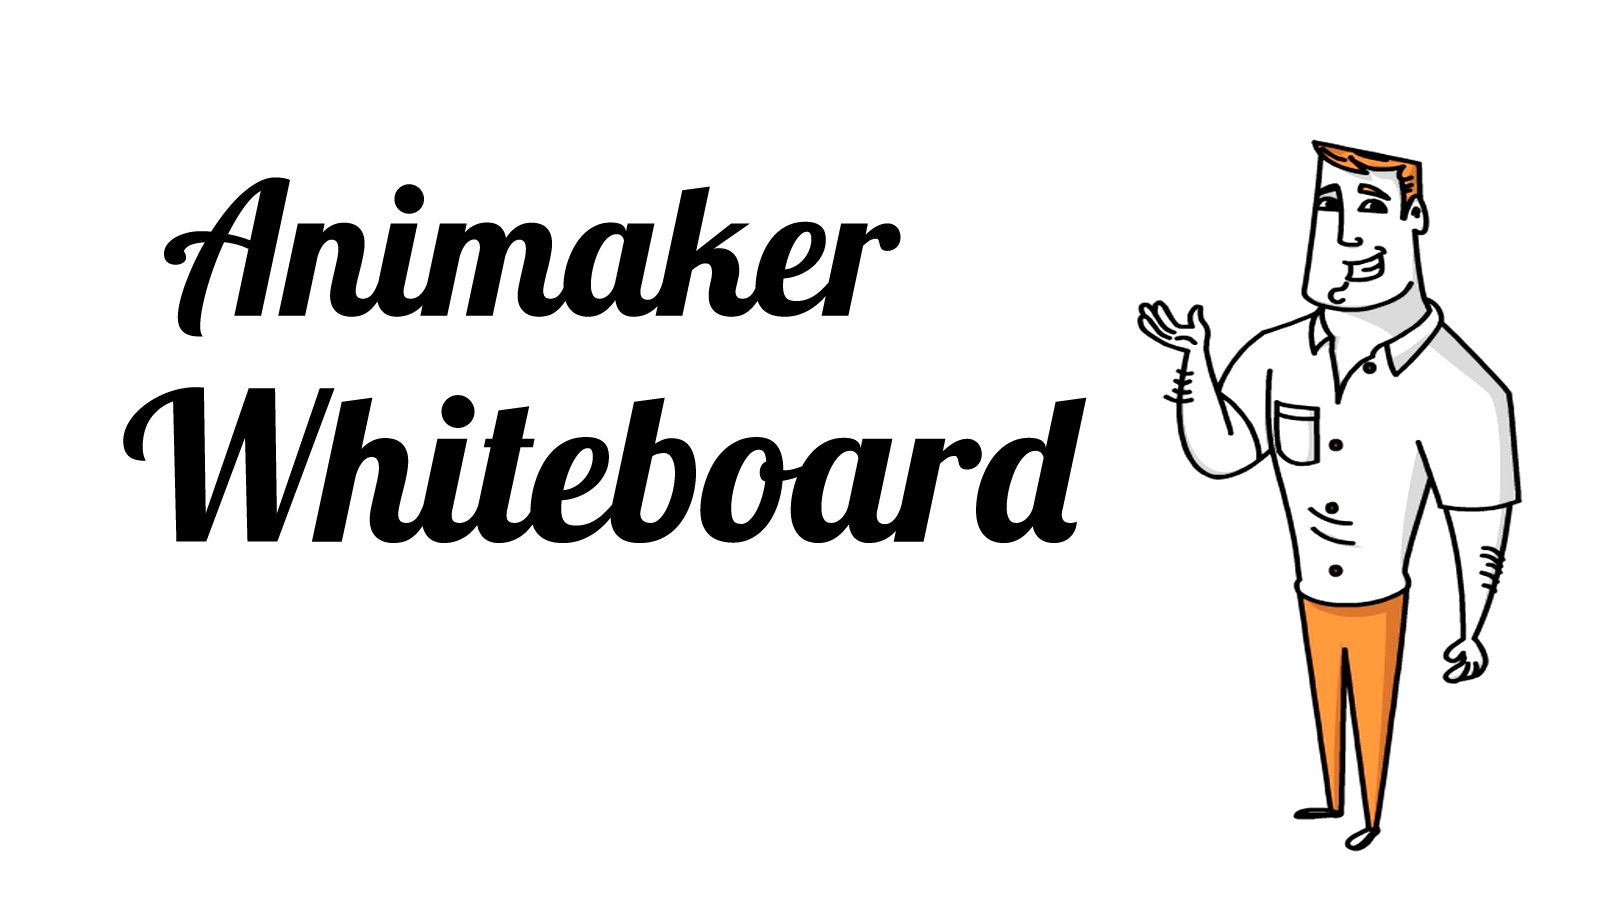 Whiteboard animation software free. download full version for mac